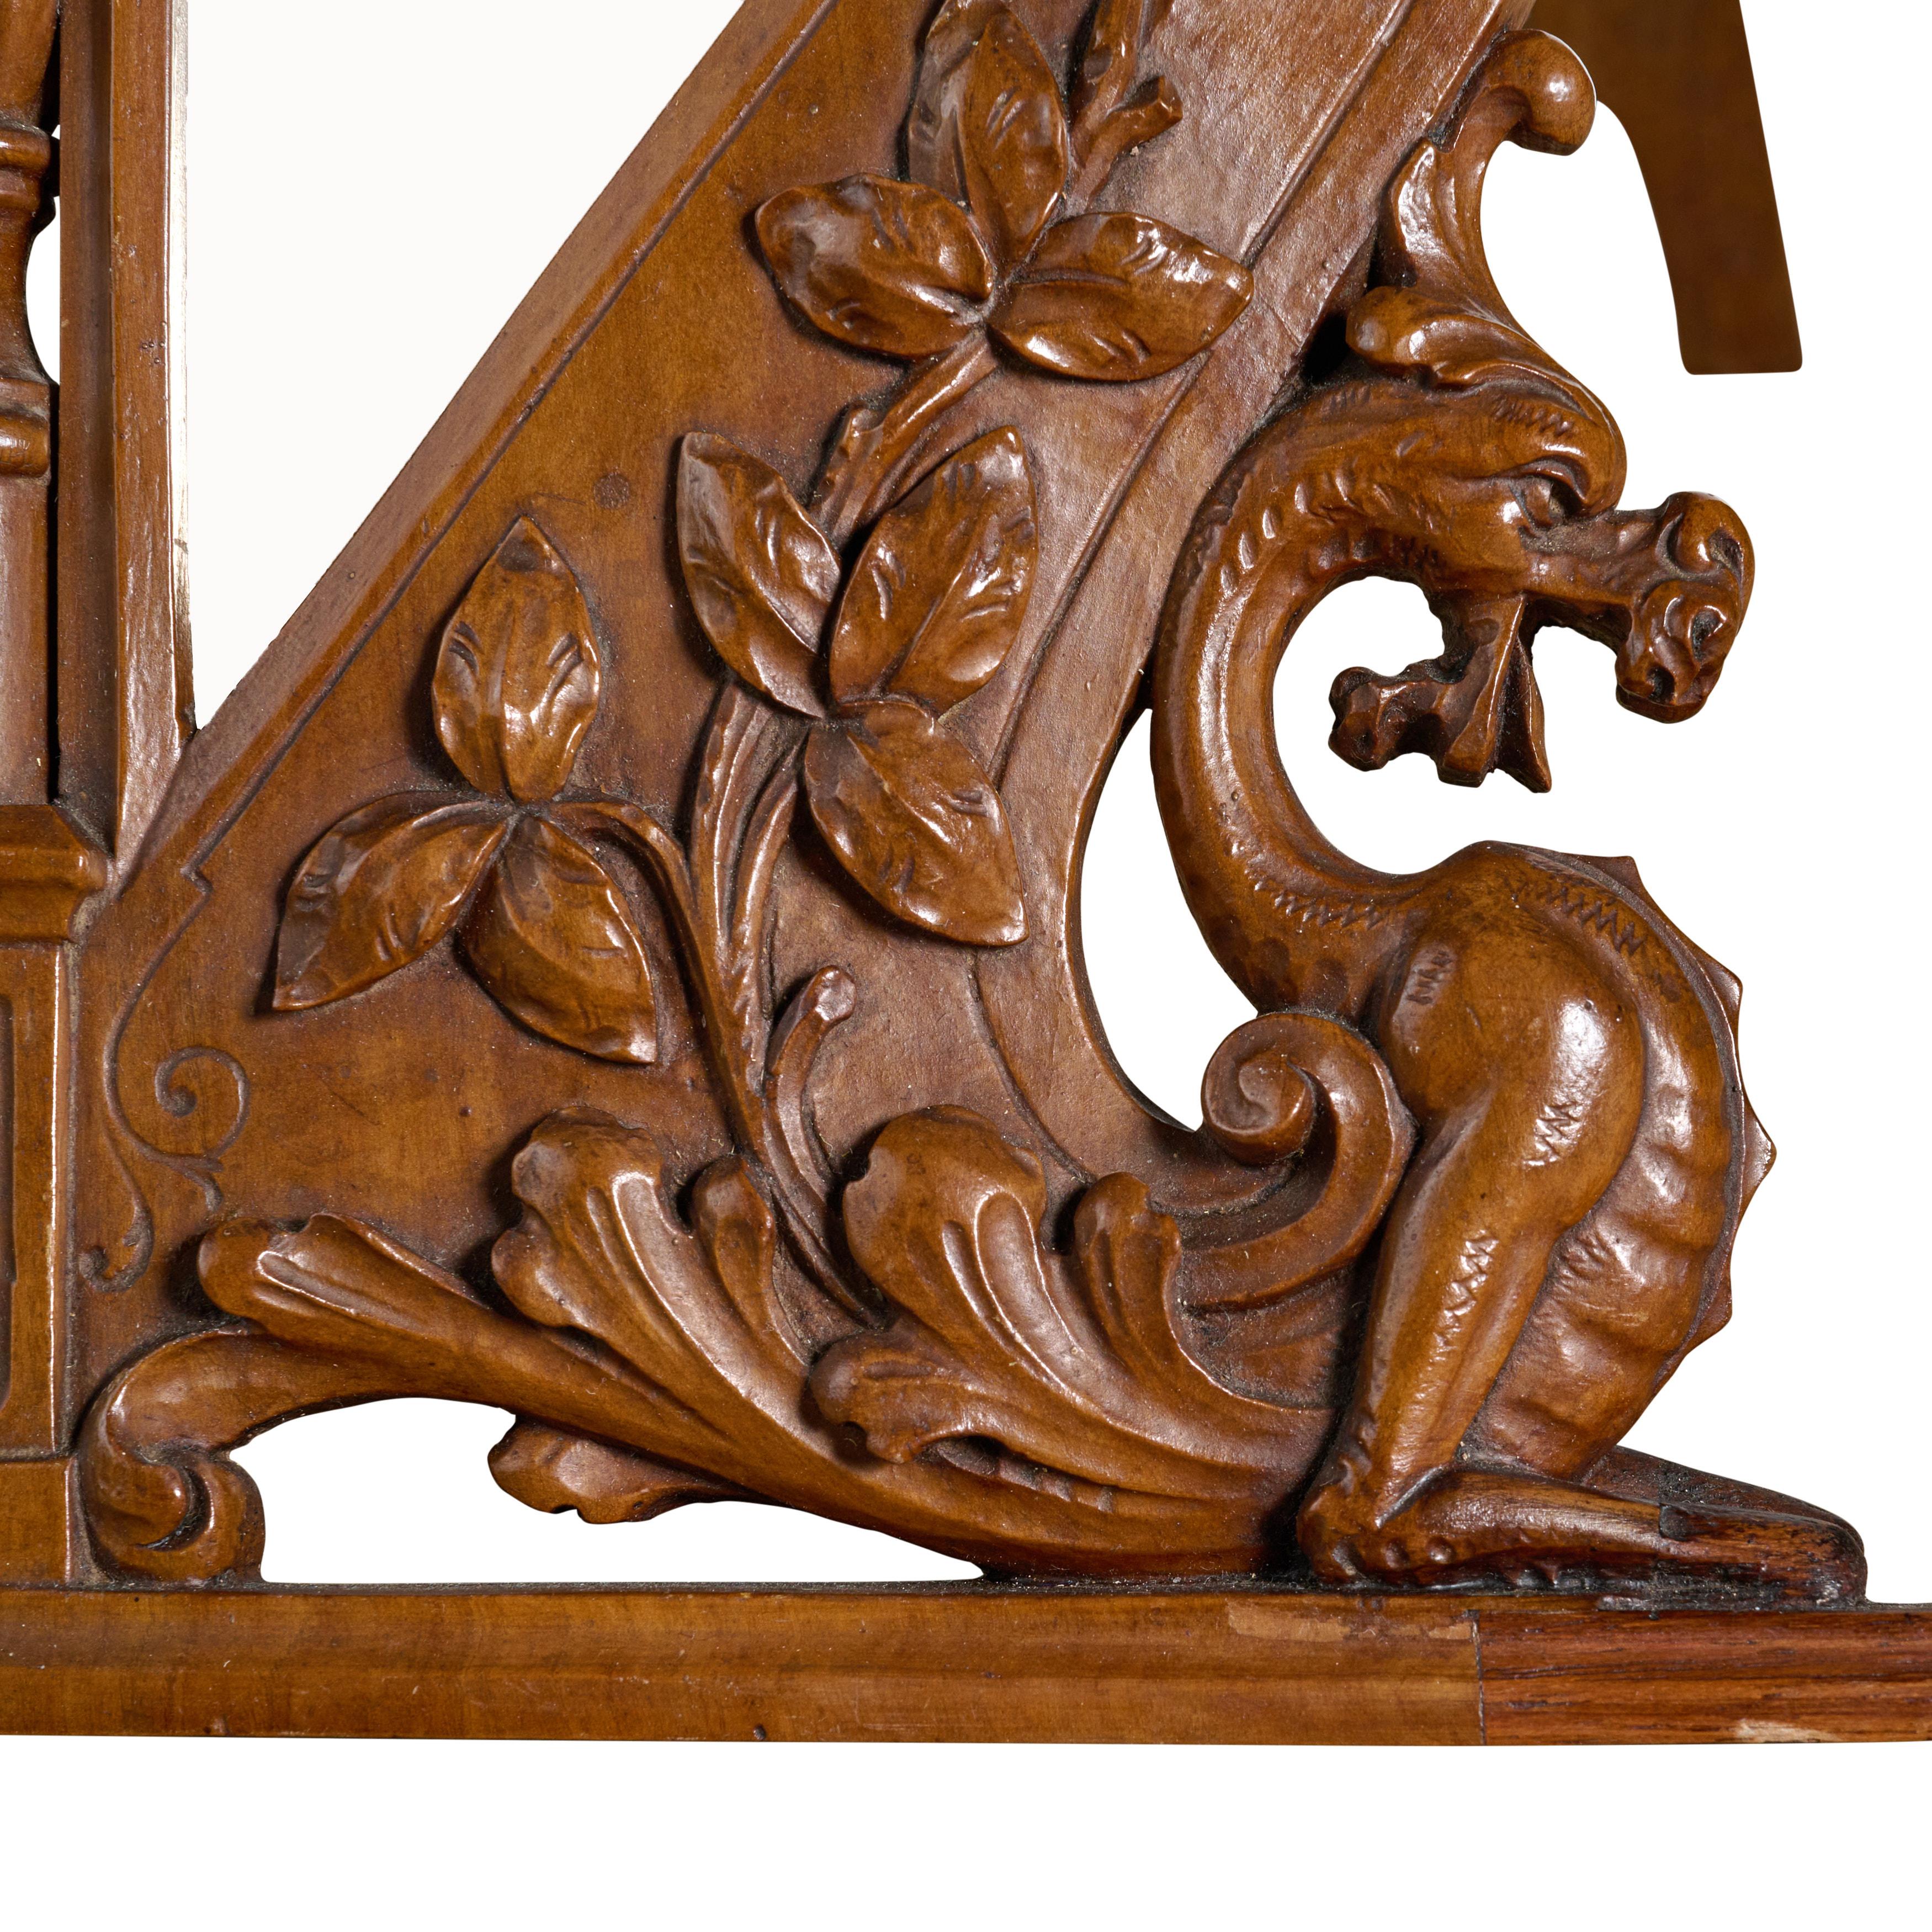 Heavily carved fantasy mirror with griffin. Very cool. 
